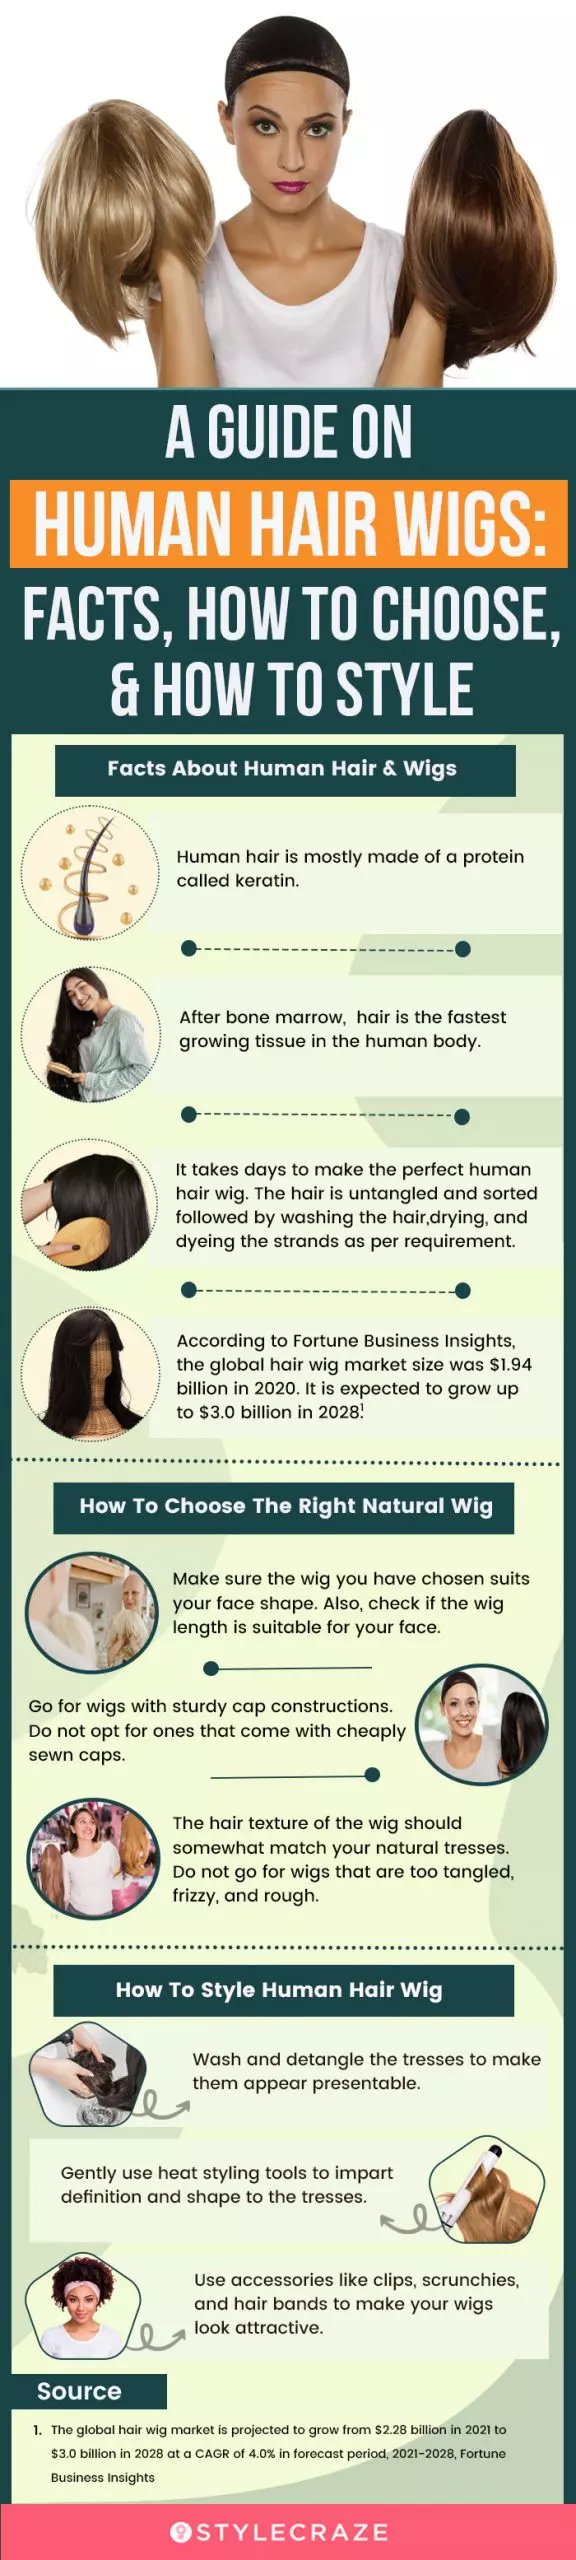 A Guide On Human Hair Wigs (infographic)